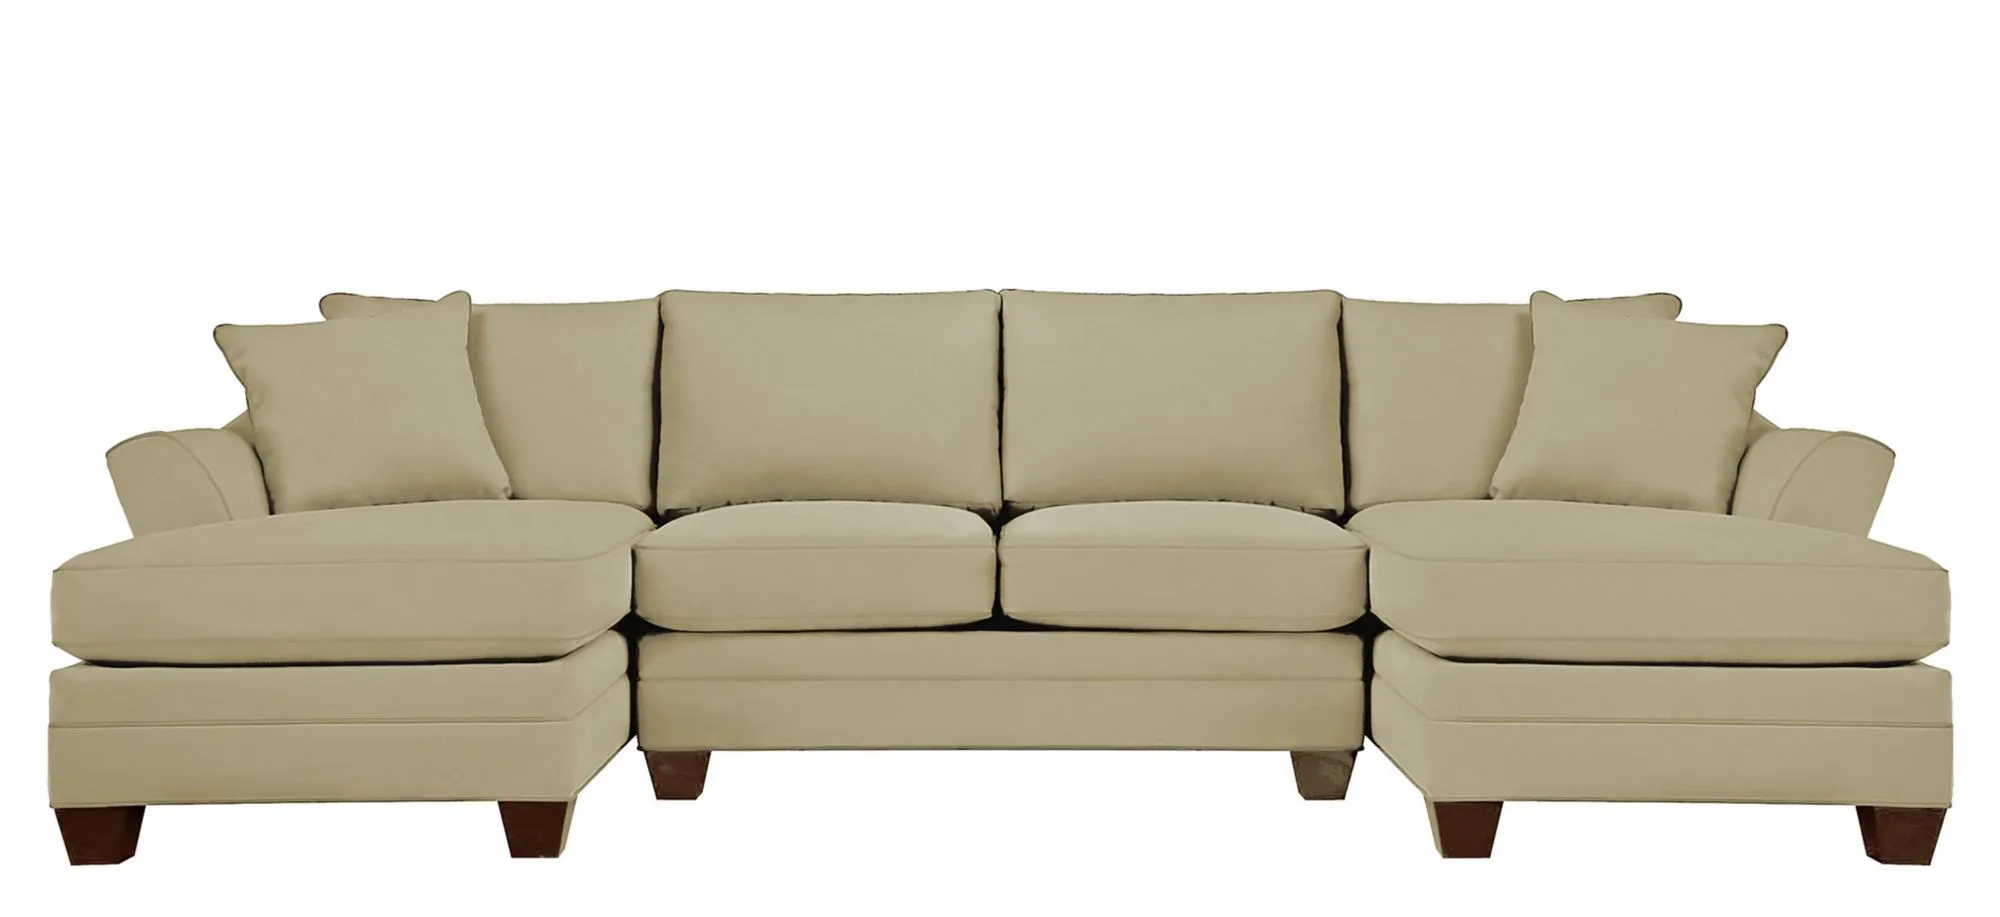 Foresthill 3-pc. Symmetrical Chaise Sectional Sofa in Suede So Soft Vanilla by H.M. Richards